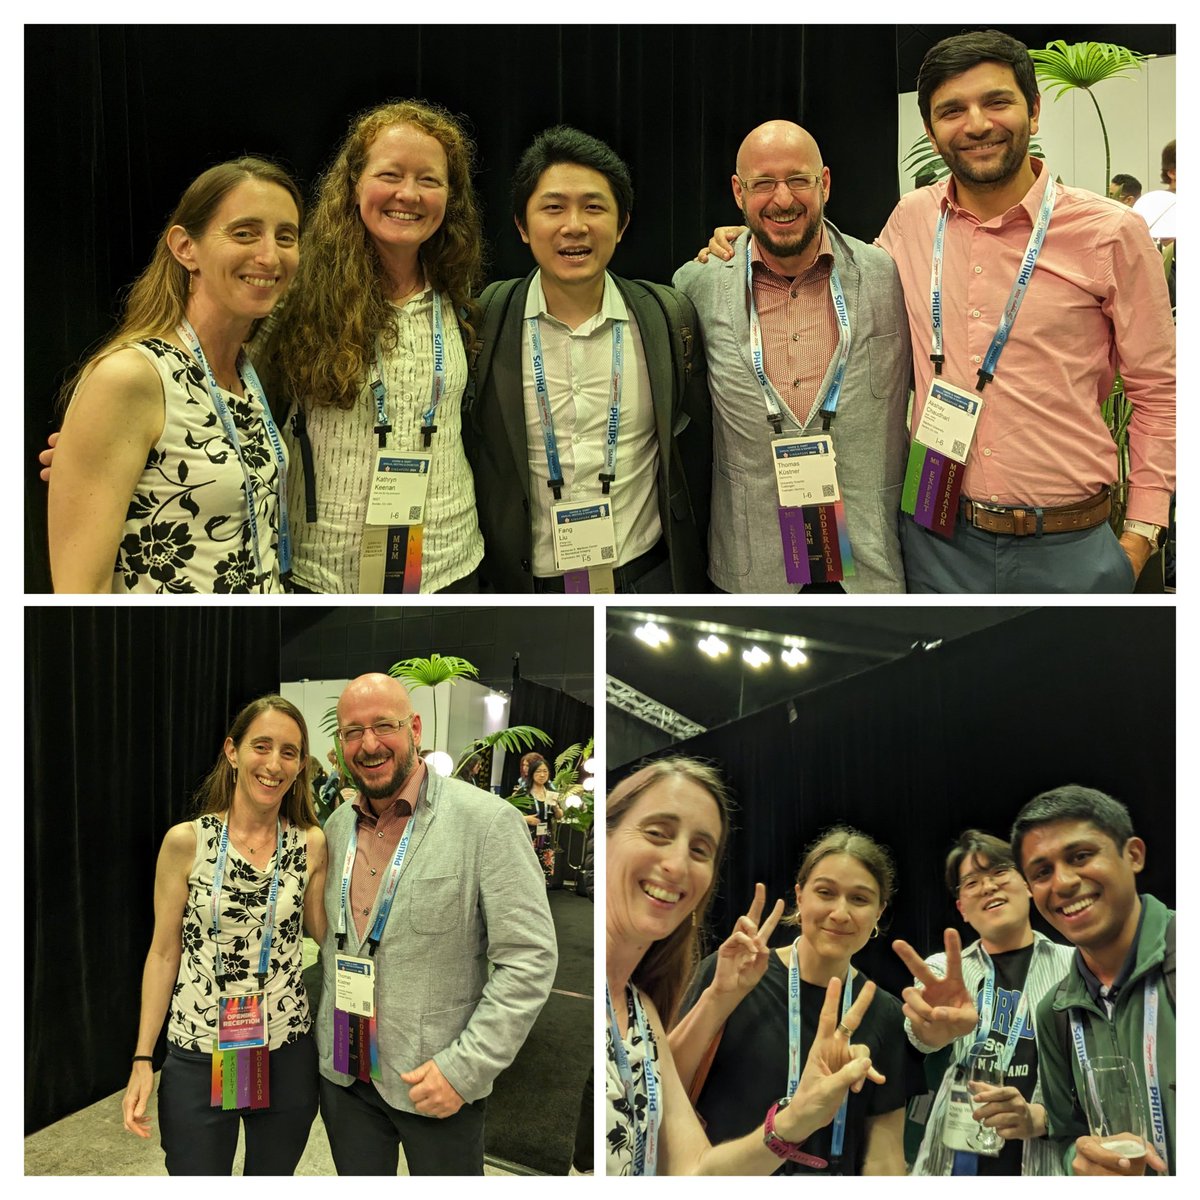 Amazing vibes at @ISMRM's first evening! It was a real pleasure to welcome new members at the society's newbie reception & reconnect with colleagues. Looking forward to tomorrow's sessions!